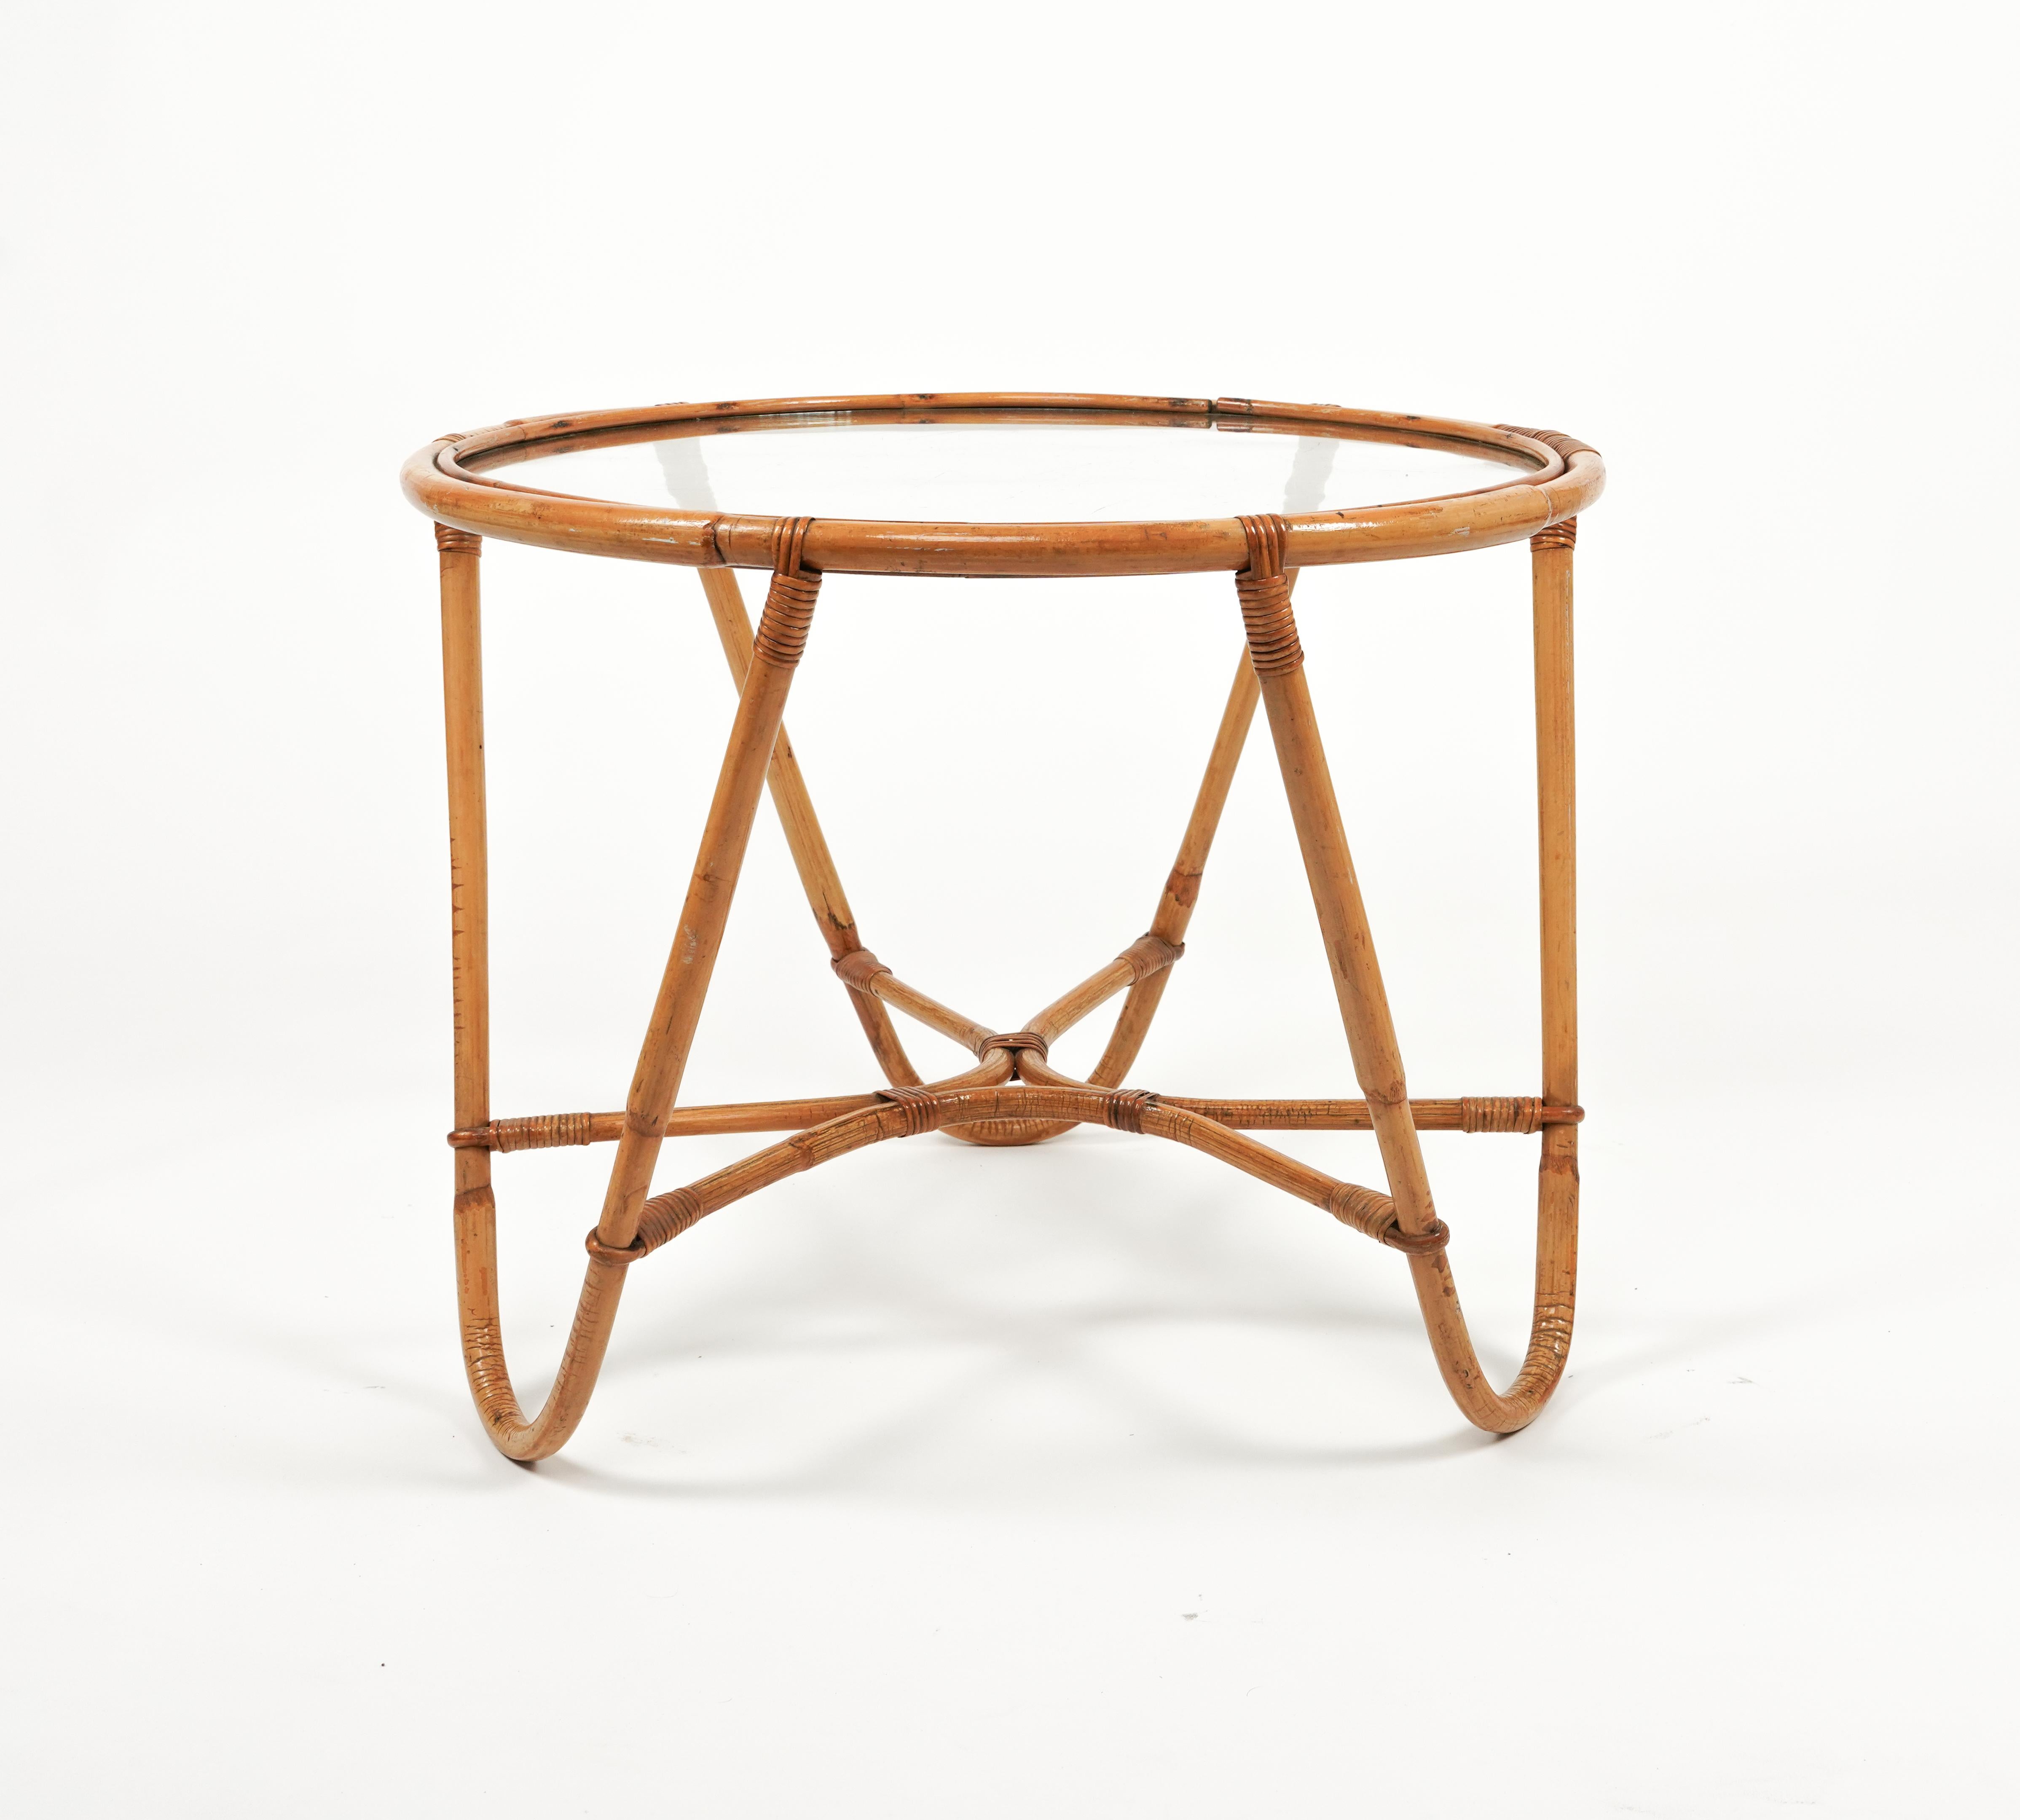 Midcentury Round Coffee Table in Bamboo, Rattan and Glass, Italy 1960s For Sale 2